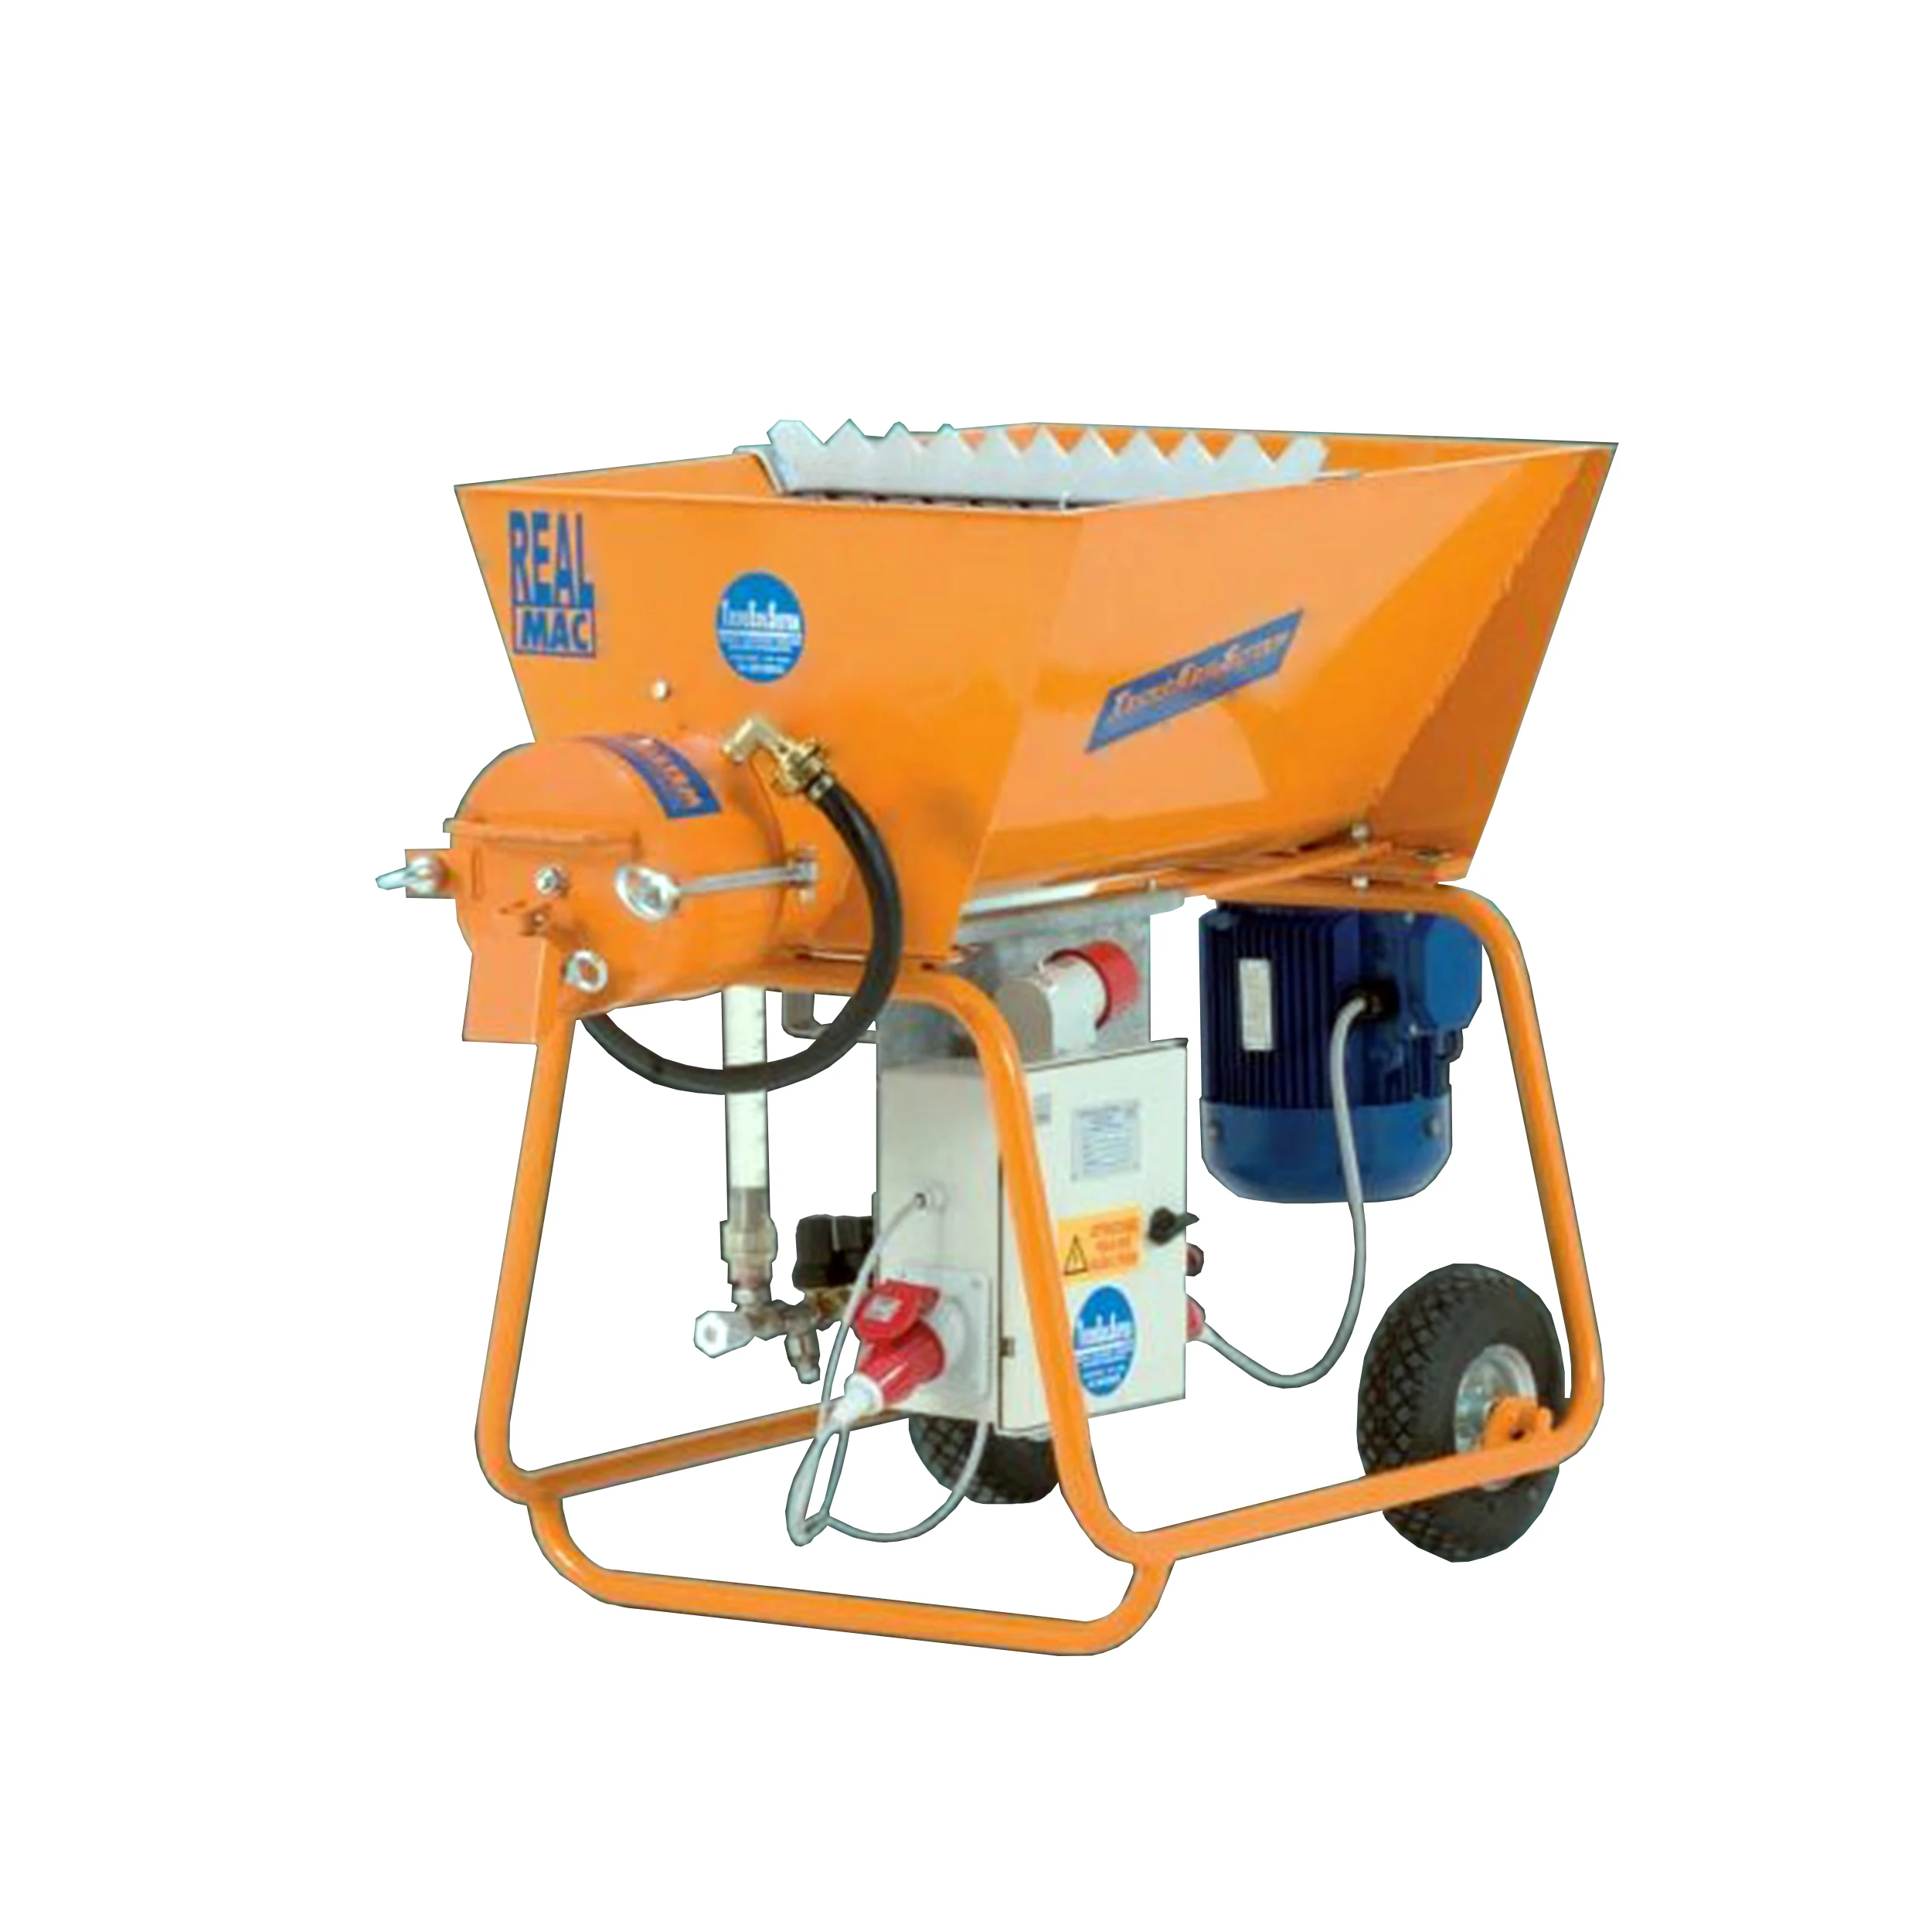 Continuous and automatic mixer for premixed mortars and selfleveling screeds REAL MAC 400V